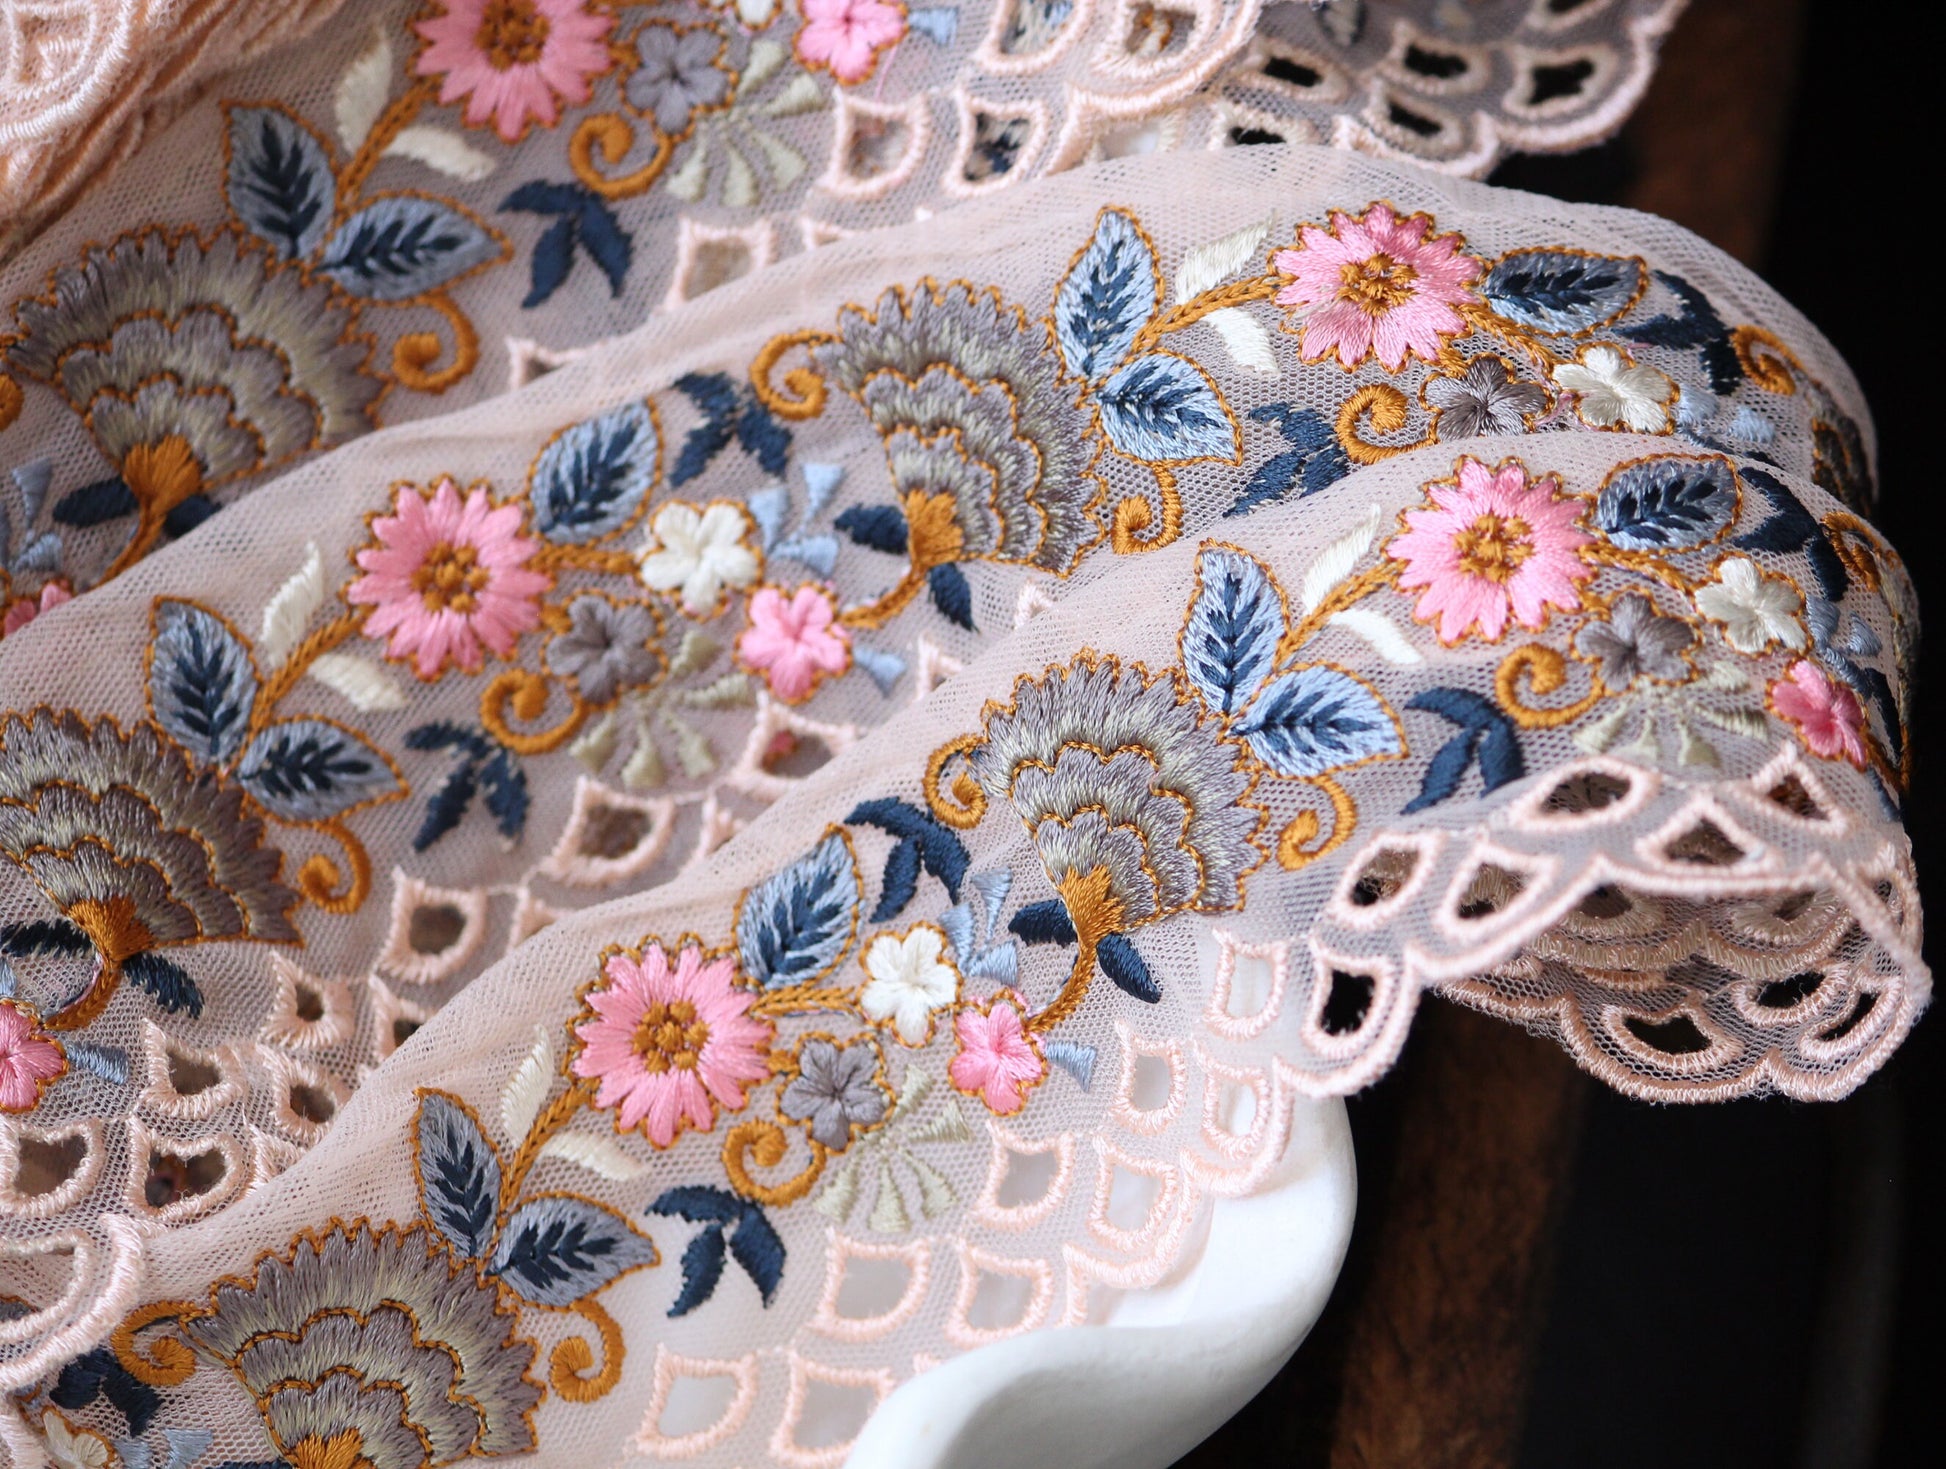 1 yard-Baby pink floral thread embroidery ribbon on mesh fabric with scallop edge-Baby pink and blue floral trim with scallop highlights